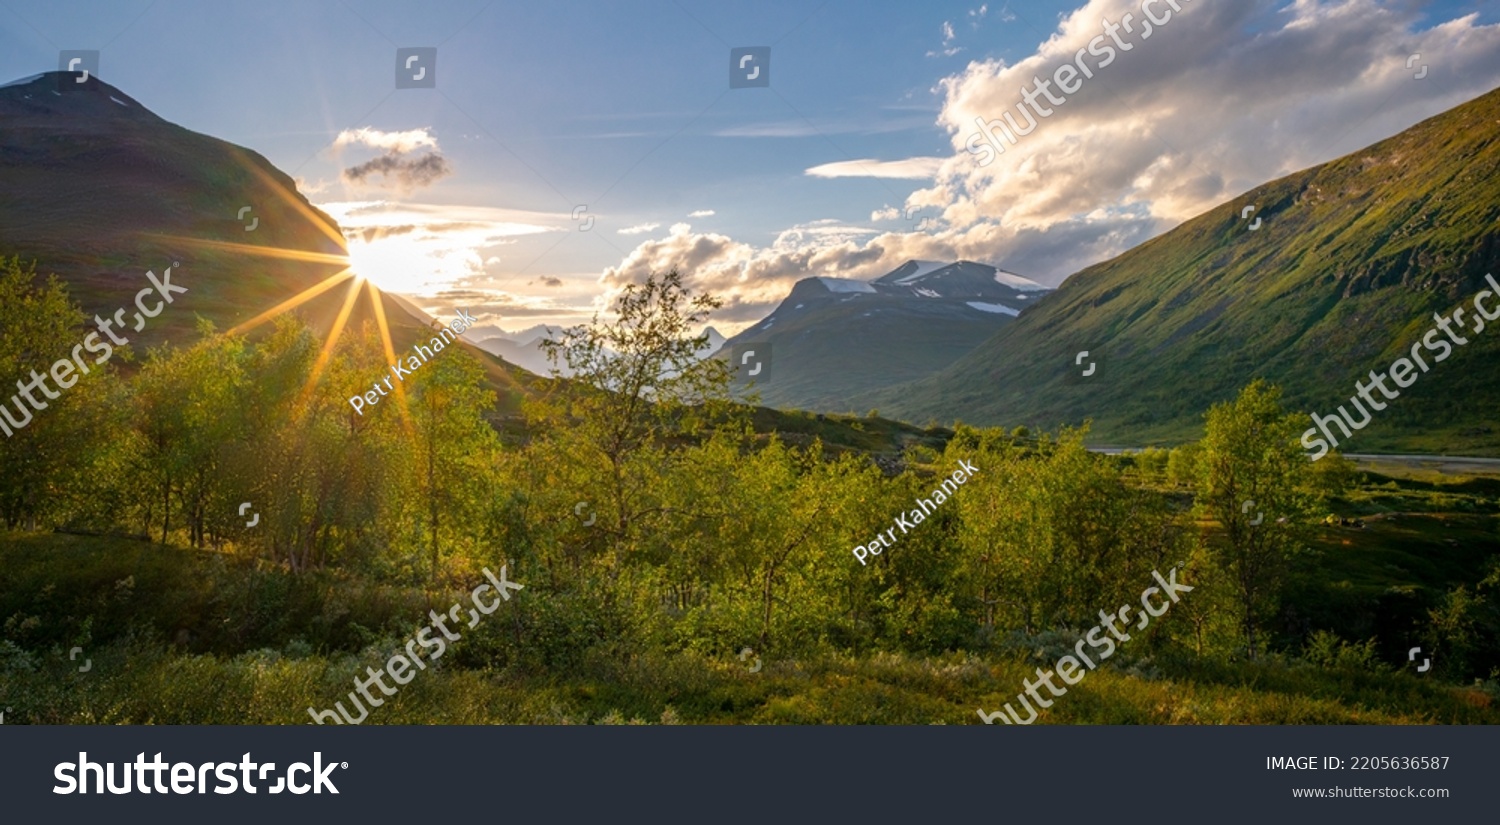 Sun setting behind the mountain in remote Arctic valley. Sarek National Park, Lapland, Sweden. Sun star. Hiking in remote wilderness of Laponia. Sunset in the mountains. #2205636587